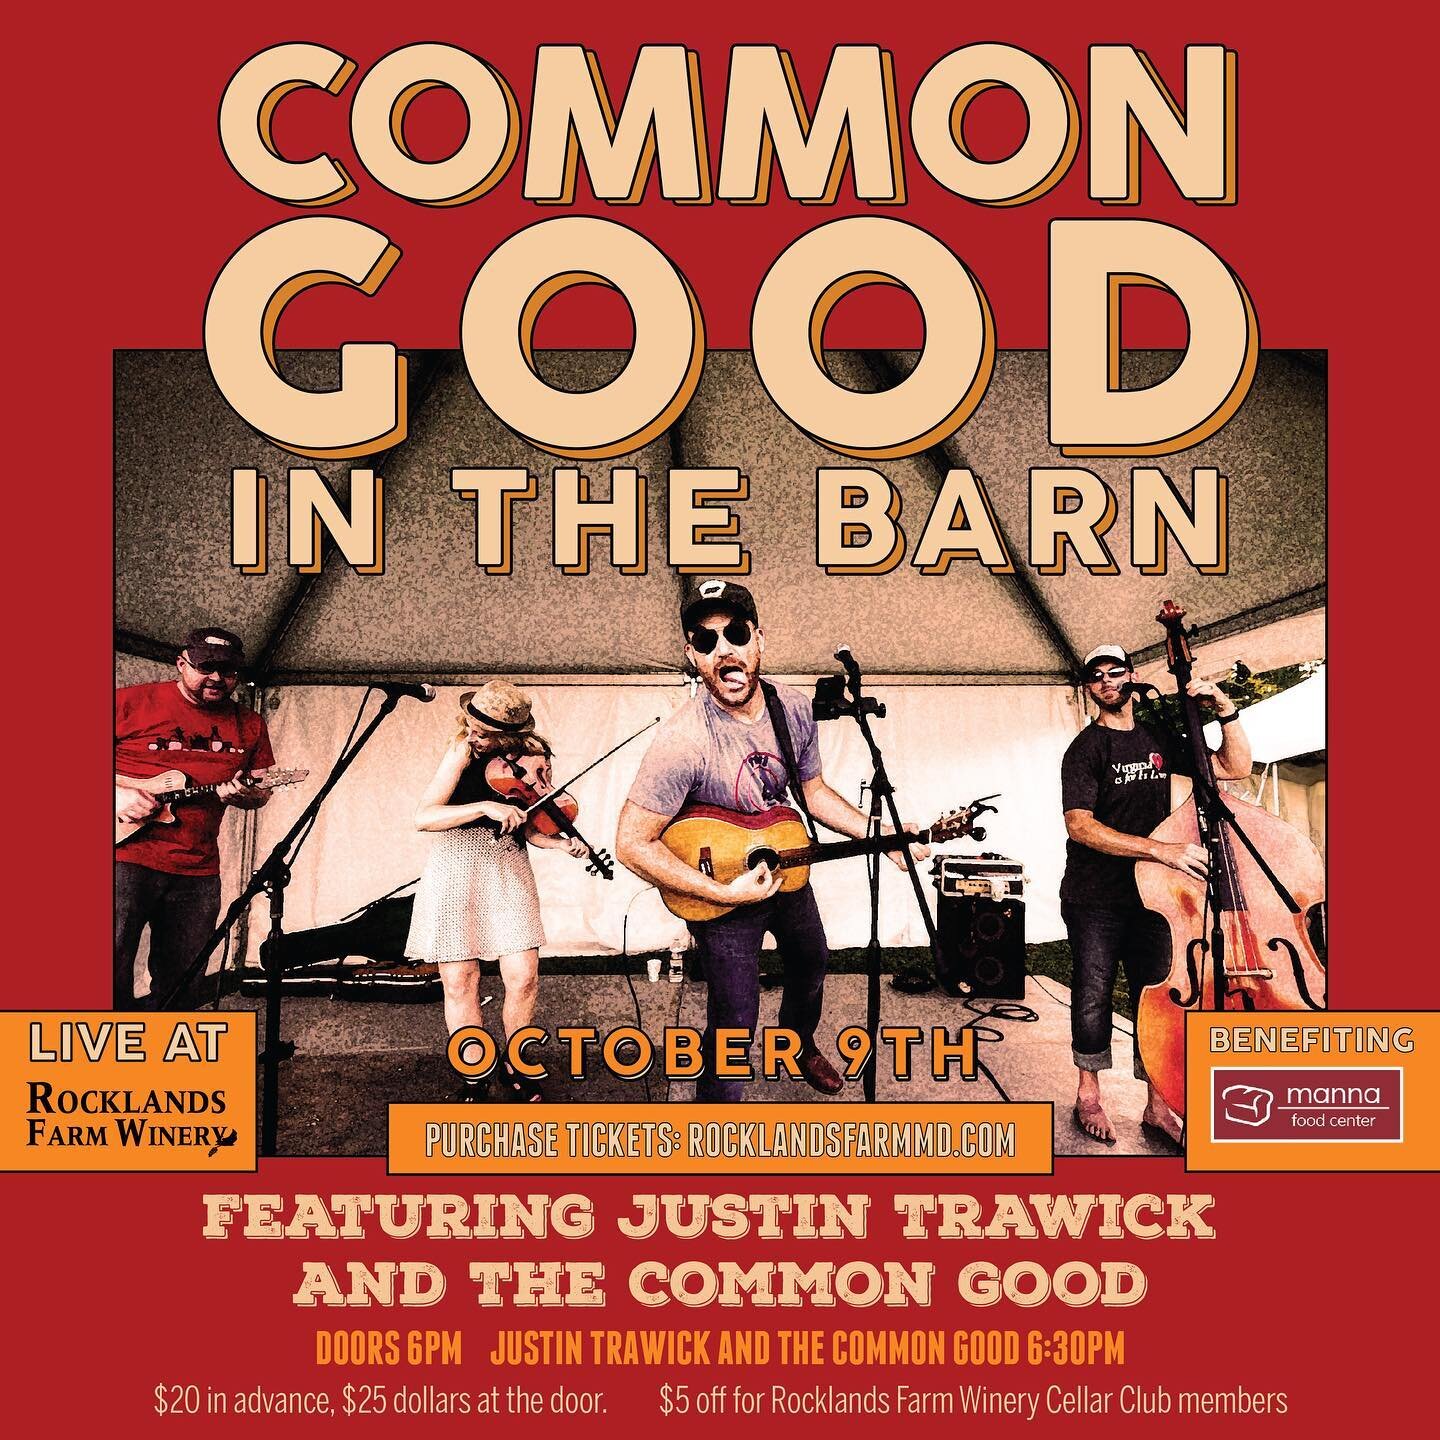 Announcing 📣: &quot;Common Good in the Barn!&quot;🎶

 A special concert on Sunday, October 9th in our barn venue with modern Americana band Justin Trawick and the Common Good benefiting Manna Food Center.&nbsp; A Virginia native, singer-songwriter 